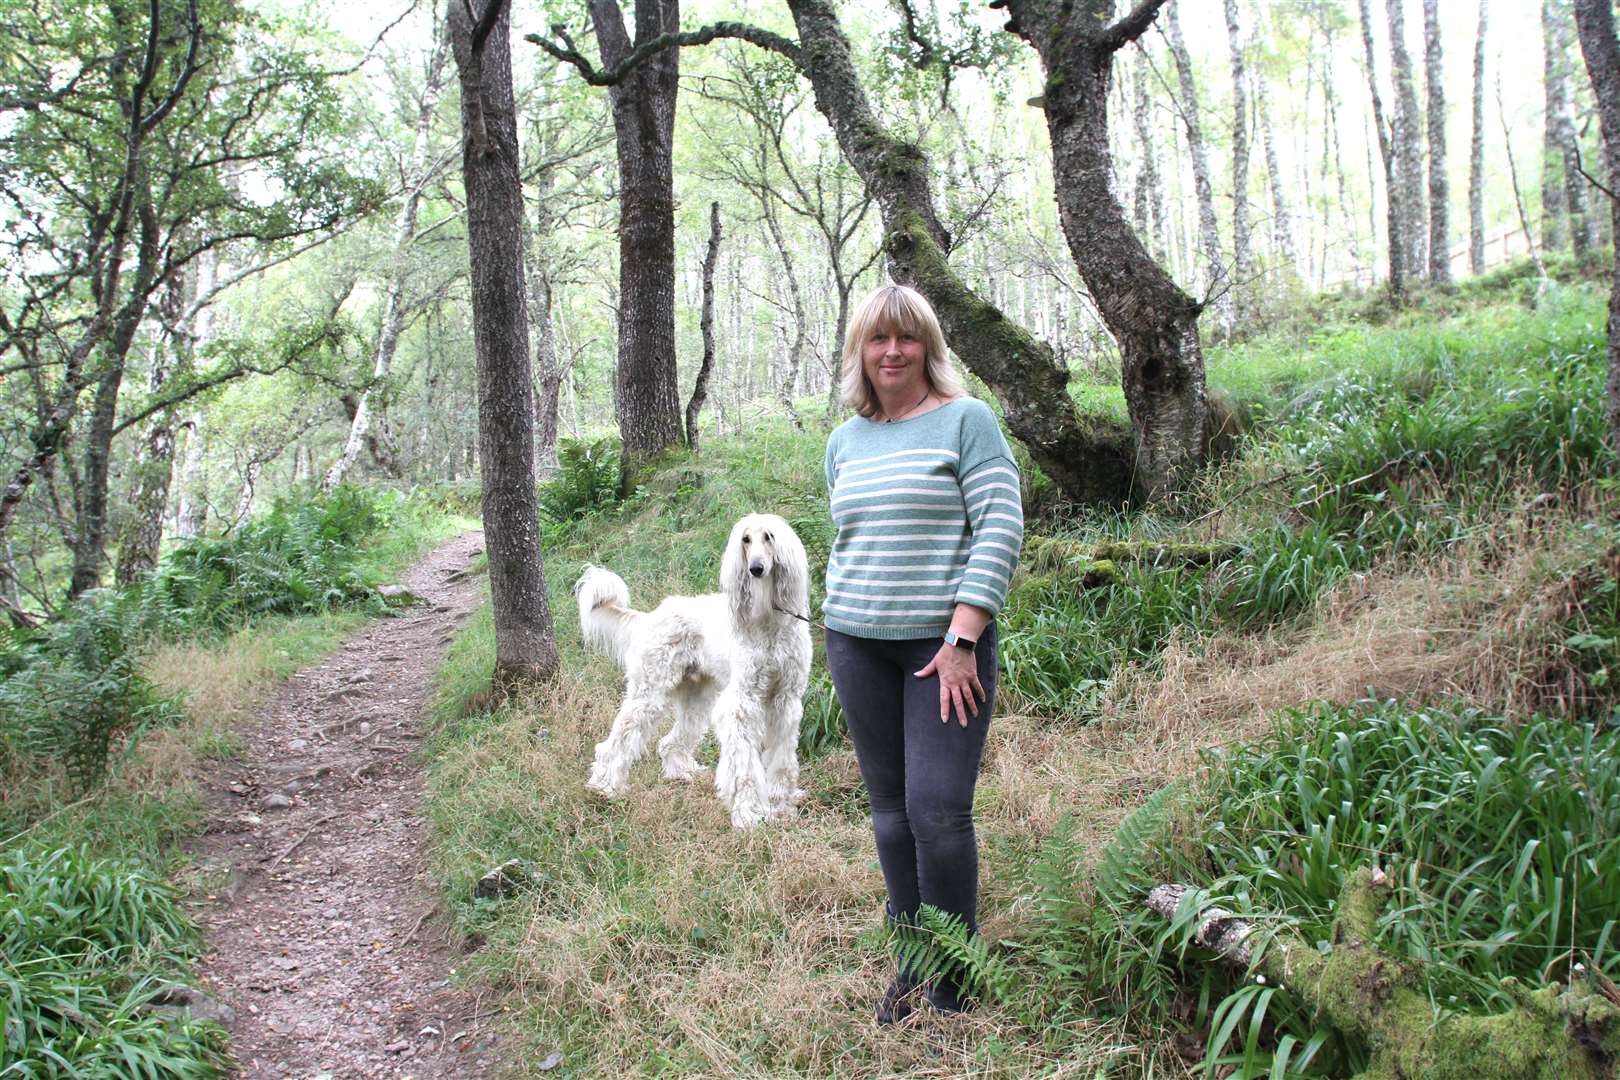 CNPA board member Pippa Hadley, also a local Highland councillor for the Scottish Greens, believes the benefits of carbon off-setting and re-wilding are not being properly highlighted. She is pictured out walking in local woods with her dog Hunter.